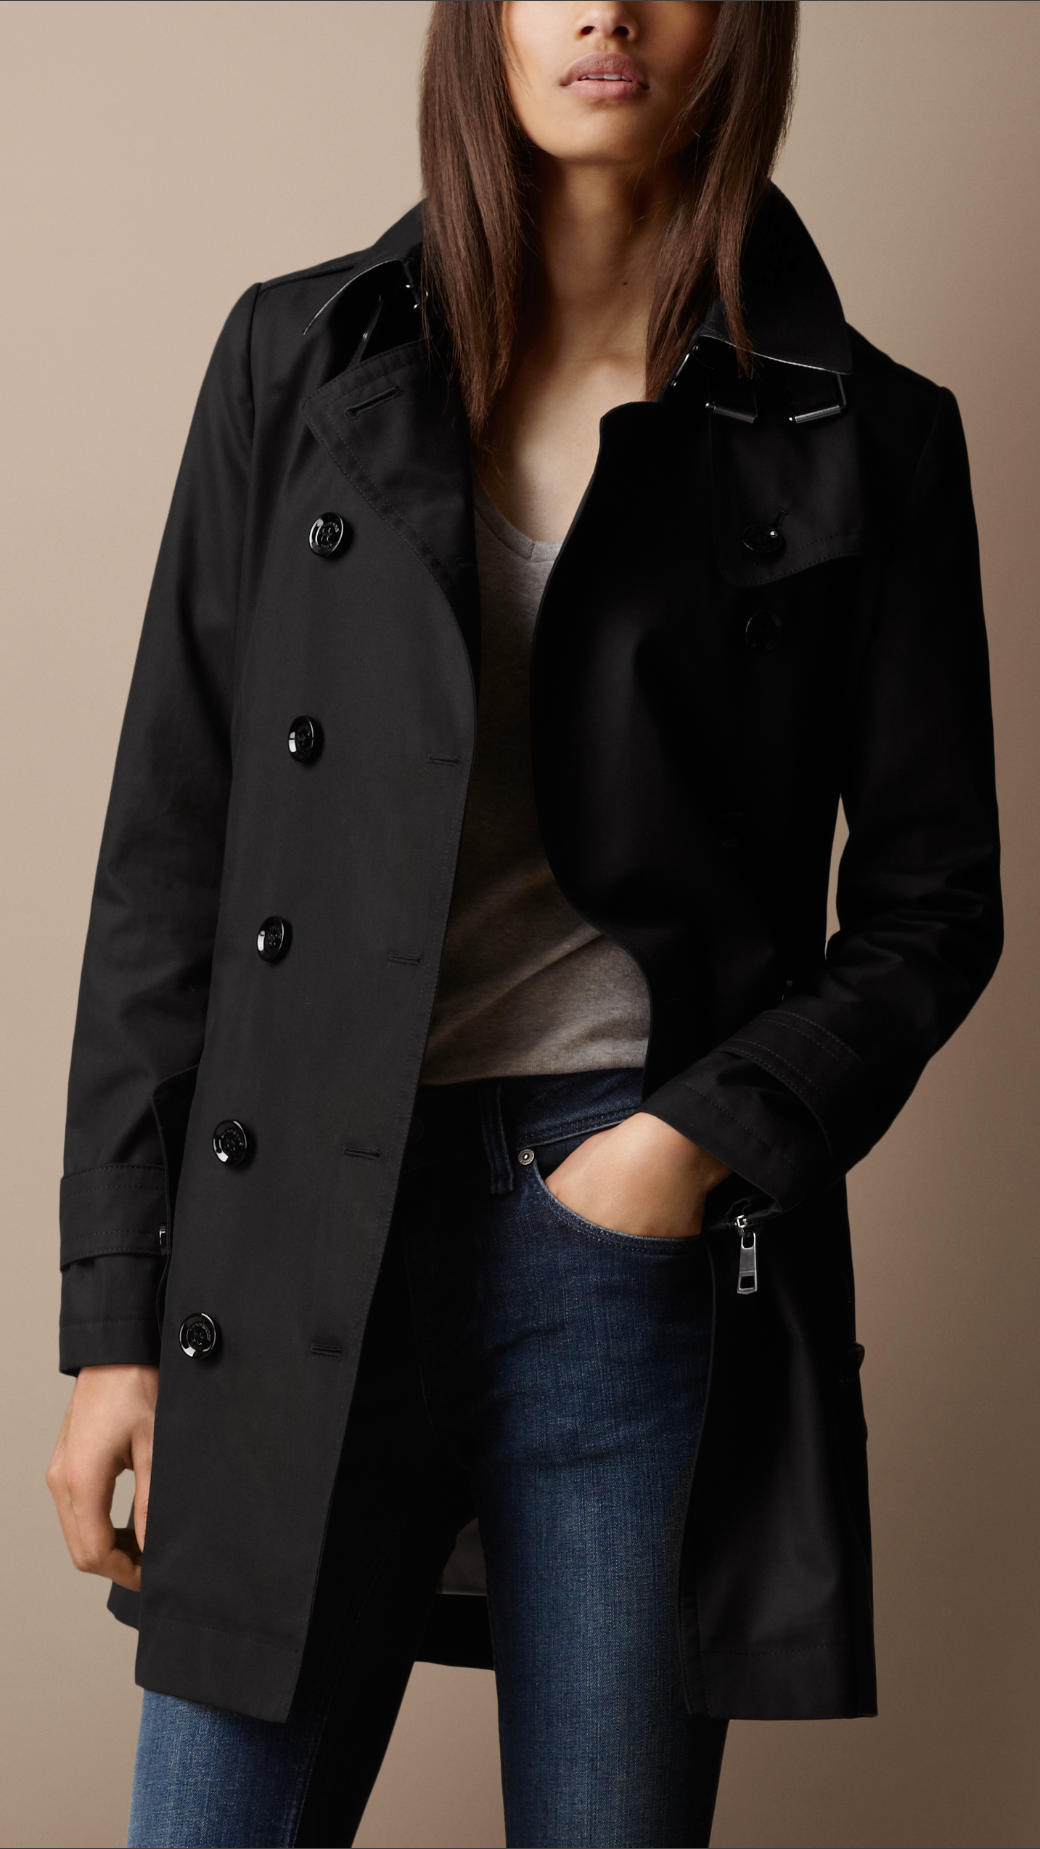 Lyst - Burberry Brit Midlength Cotton Zip Cuff Trench Coat in Black